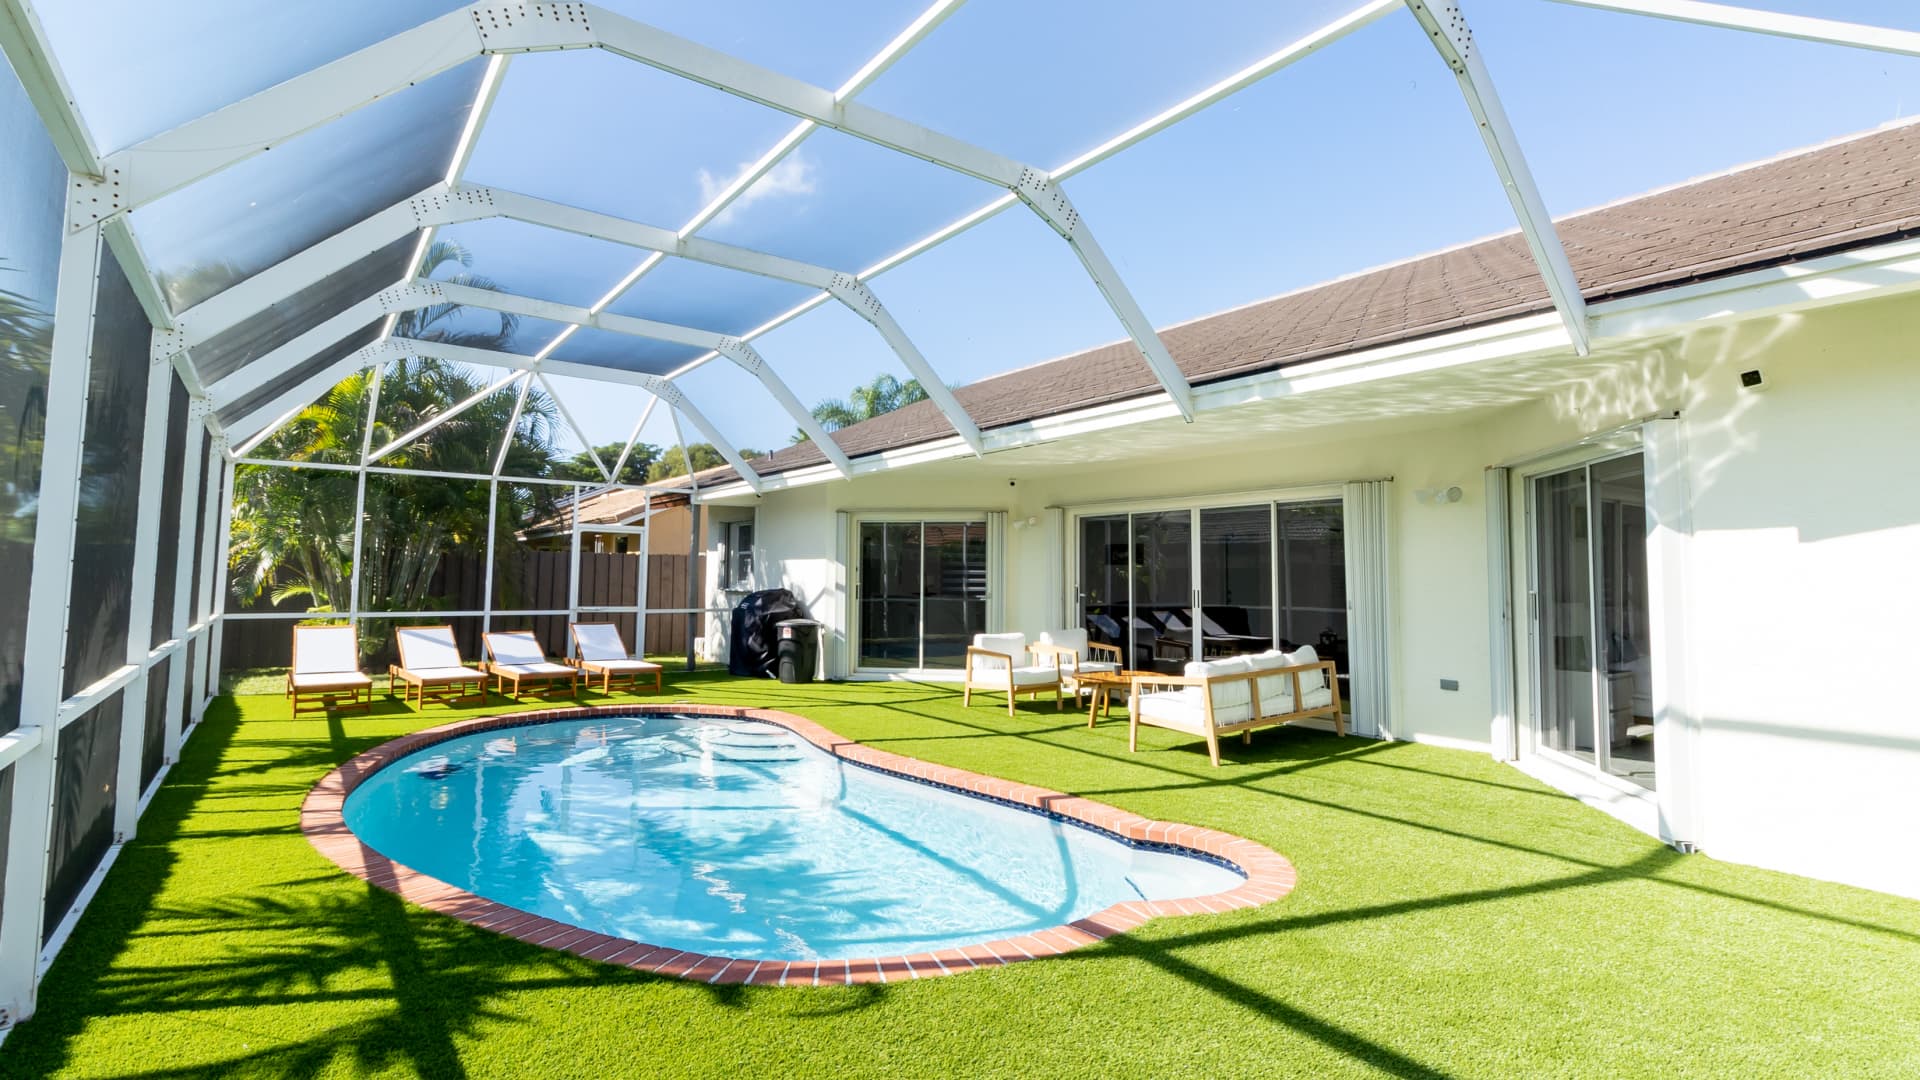 This 4-bedroom, 2-bathroom Miami, Florida home can accomodate eight guests.